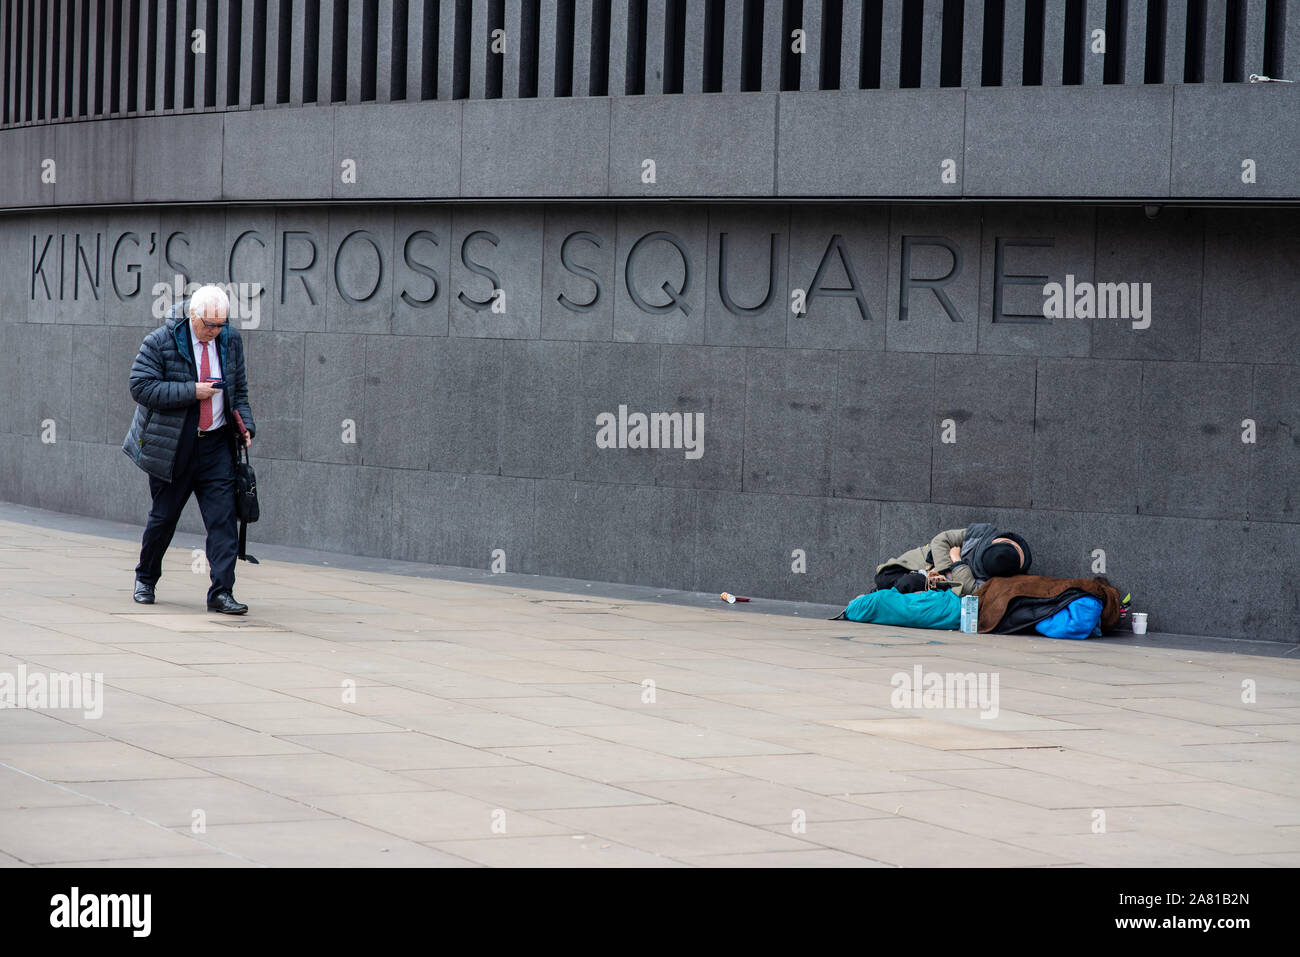 London, United Kingdom - November 5, 2019: A man in a suit walks through King's Cross Square while a rough sleeper rests on the pavement. Stock Photo